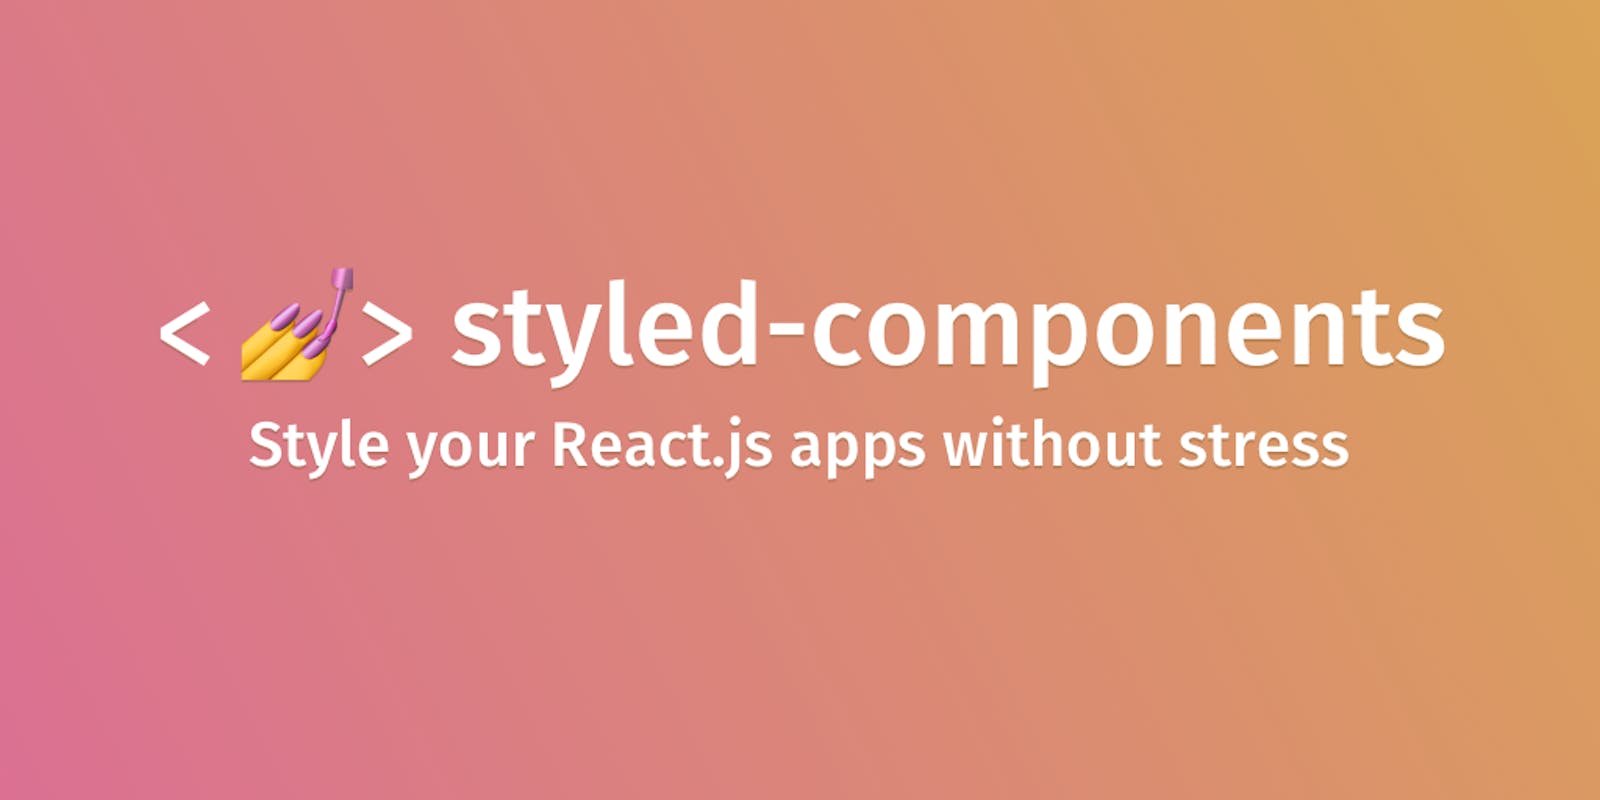 How to Pass className to Styled-Components in React